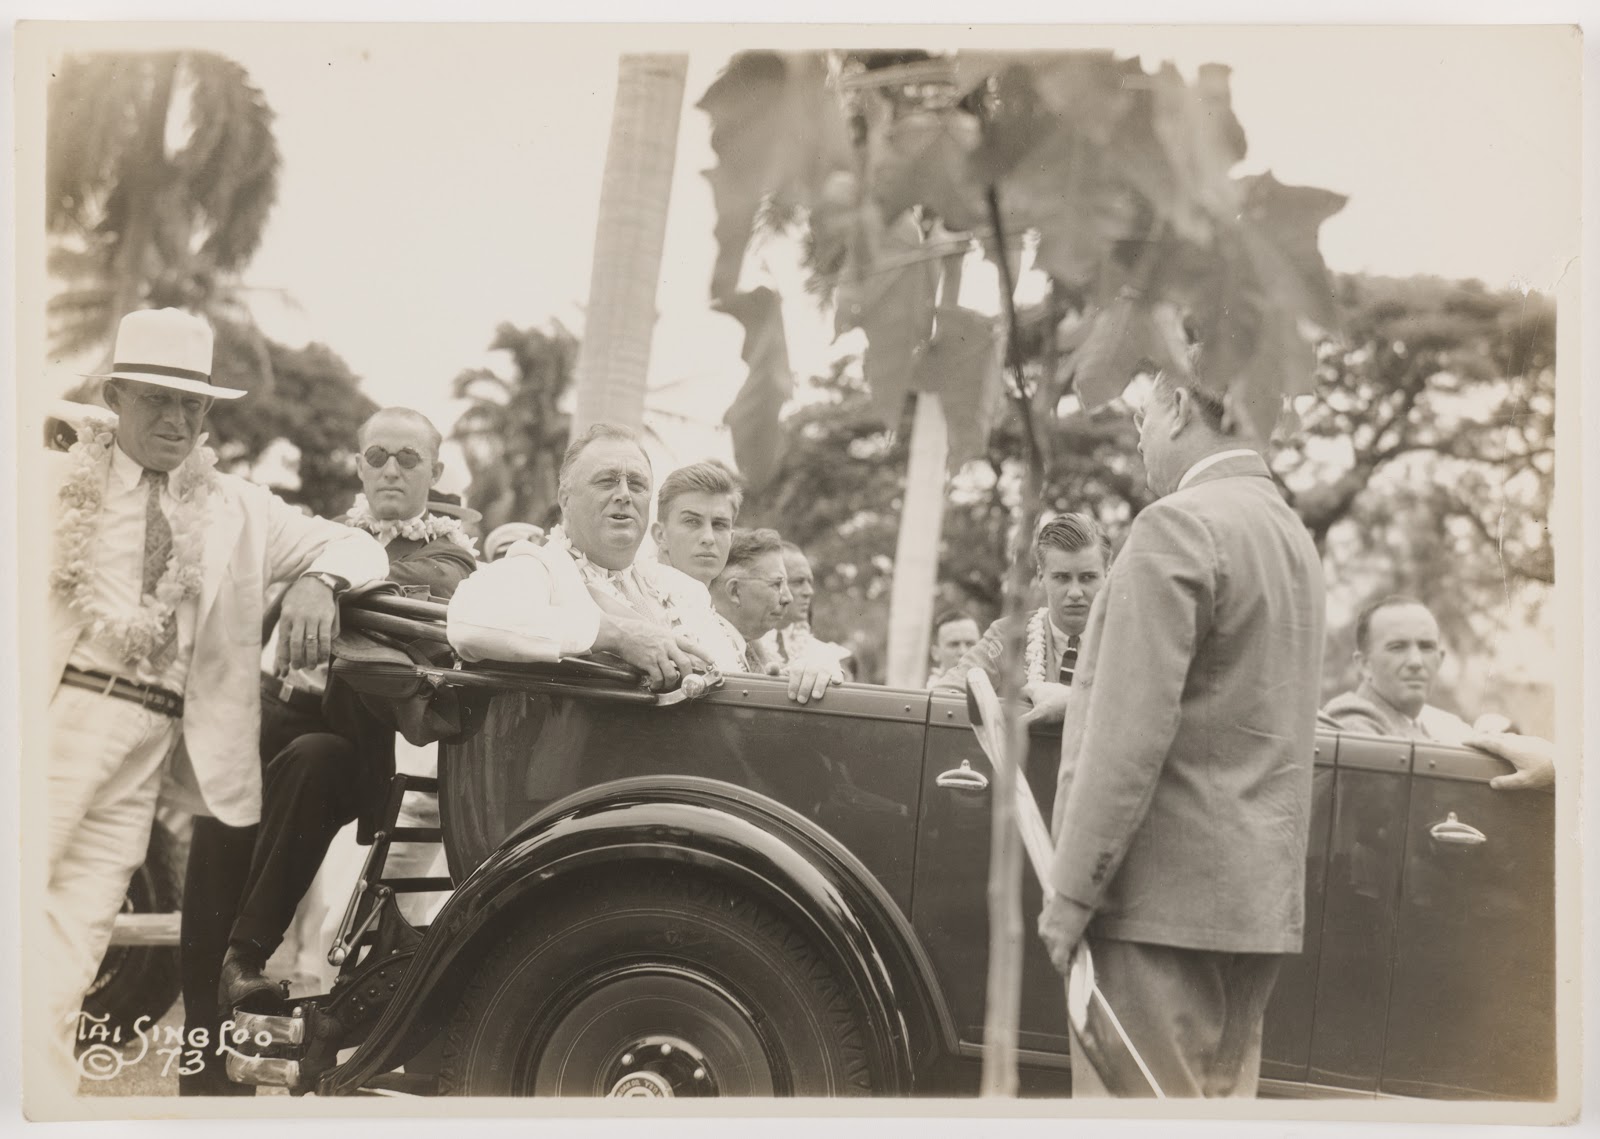 Tai Sing Loo, President Franklin D. Roosevelt, Delano Roosevelt Jr., the Governor of Hawai’i Joseph Poindexter, and John Aspinwall Roosevelt, United States, Hawai’i, 1934, Los Angeles County Museum of Art, partial gift of Mark and Carolyn Blackburn and purchased with funds from LACMA's 50th Anniversary Gala and FIJI Water, photo © Museum Associates/LACMA